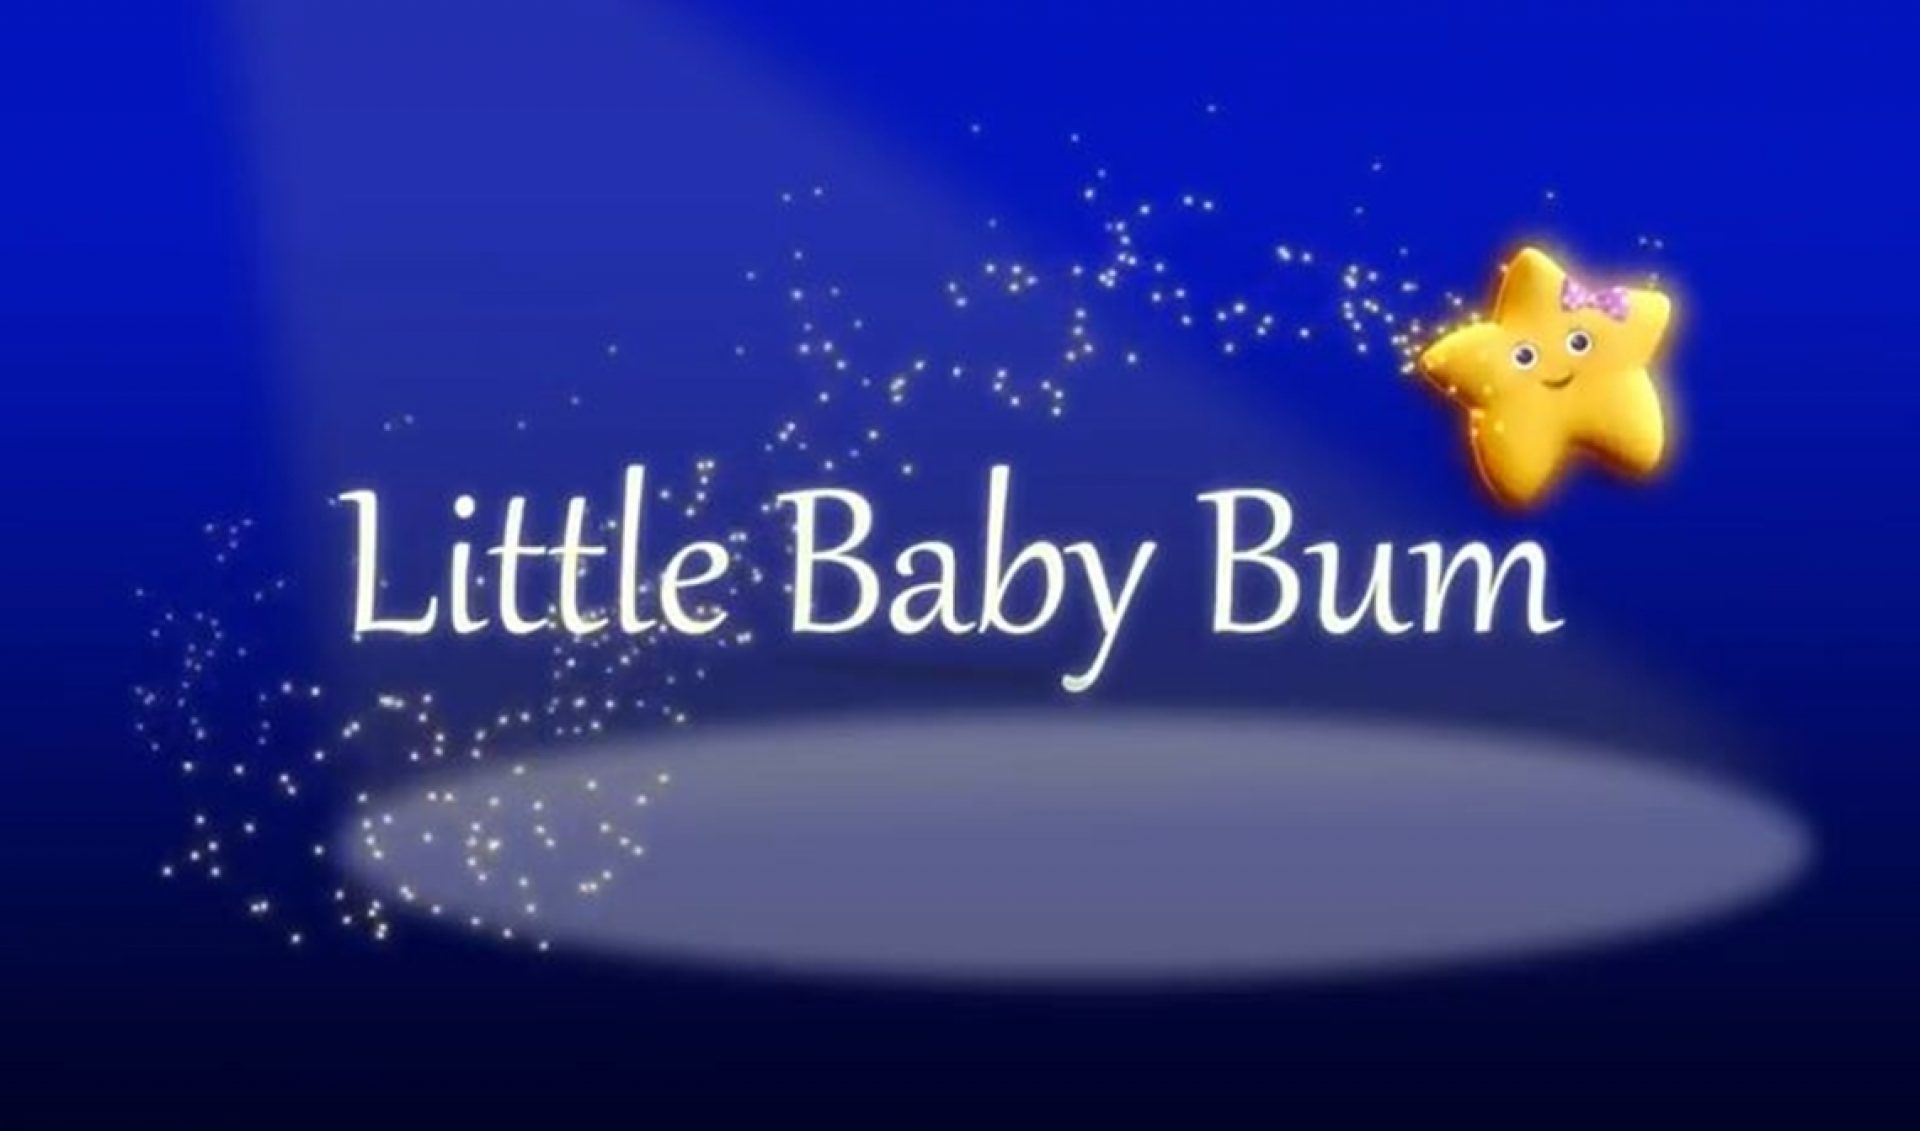 The 9th Most-Viewed YouTube Channel On Earth, ‘Little Baby Bum’, Has Been Acquired